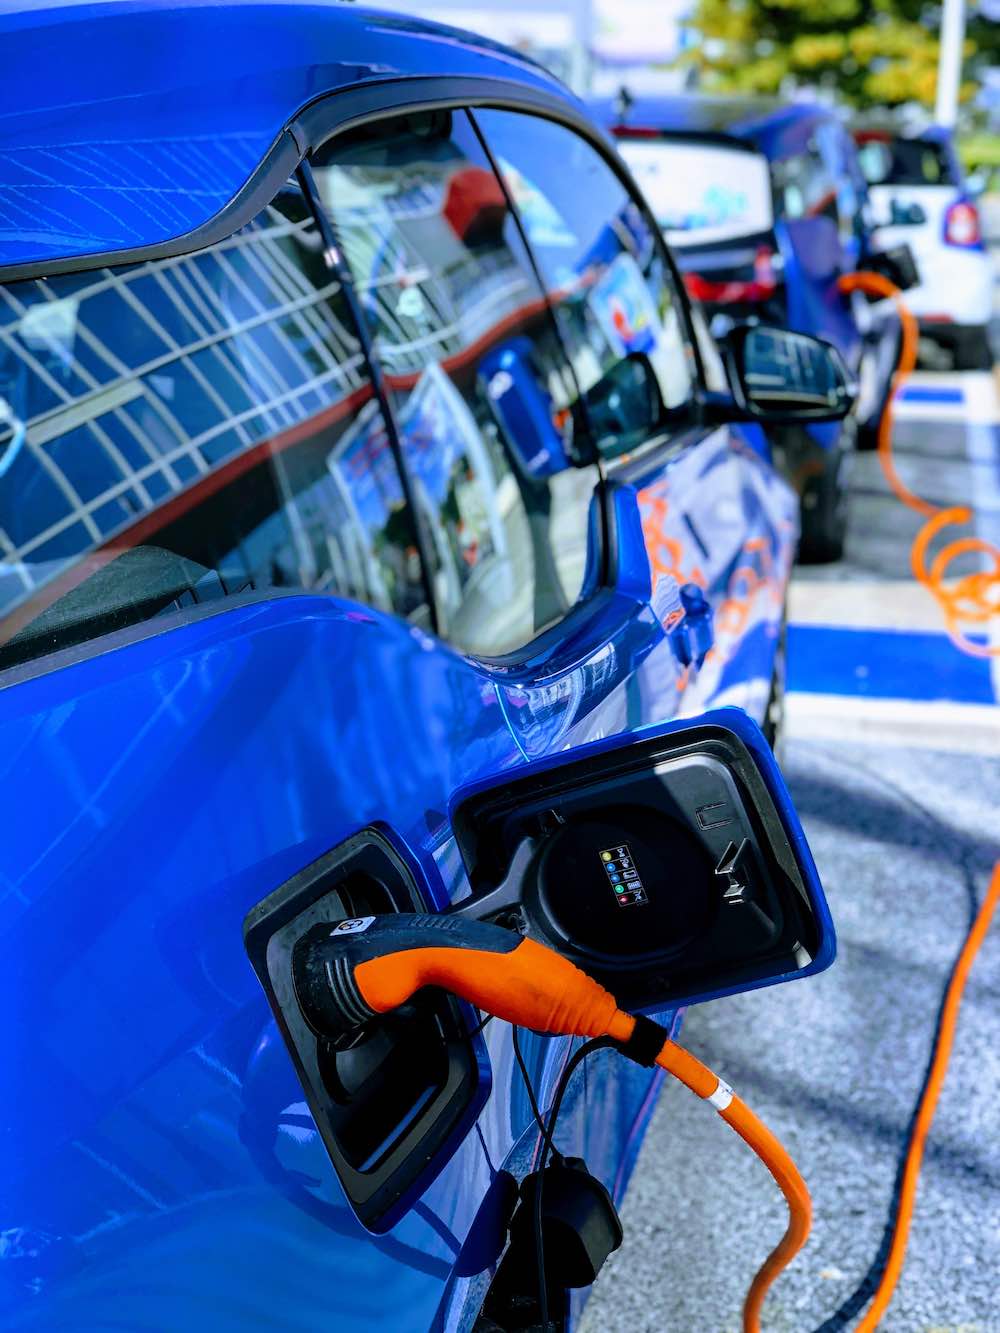 RenewEconomy and The Driven to host electric vehicle conference